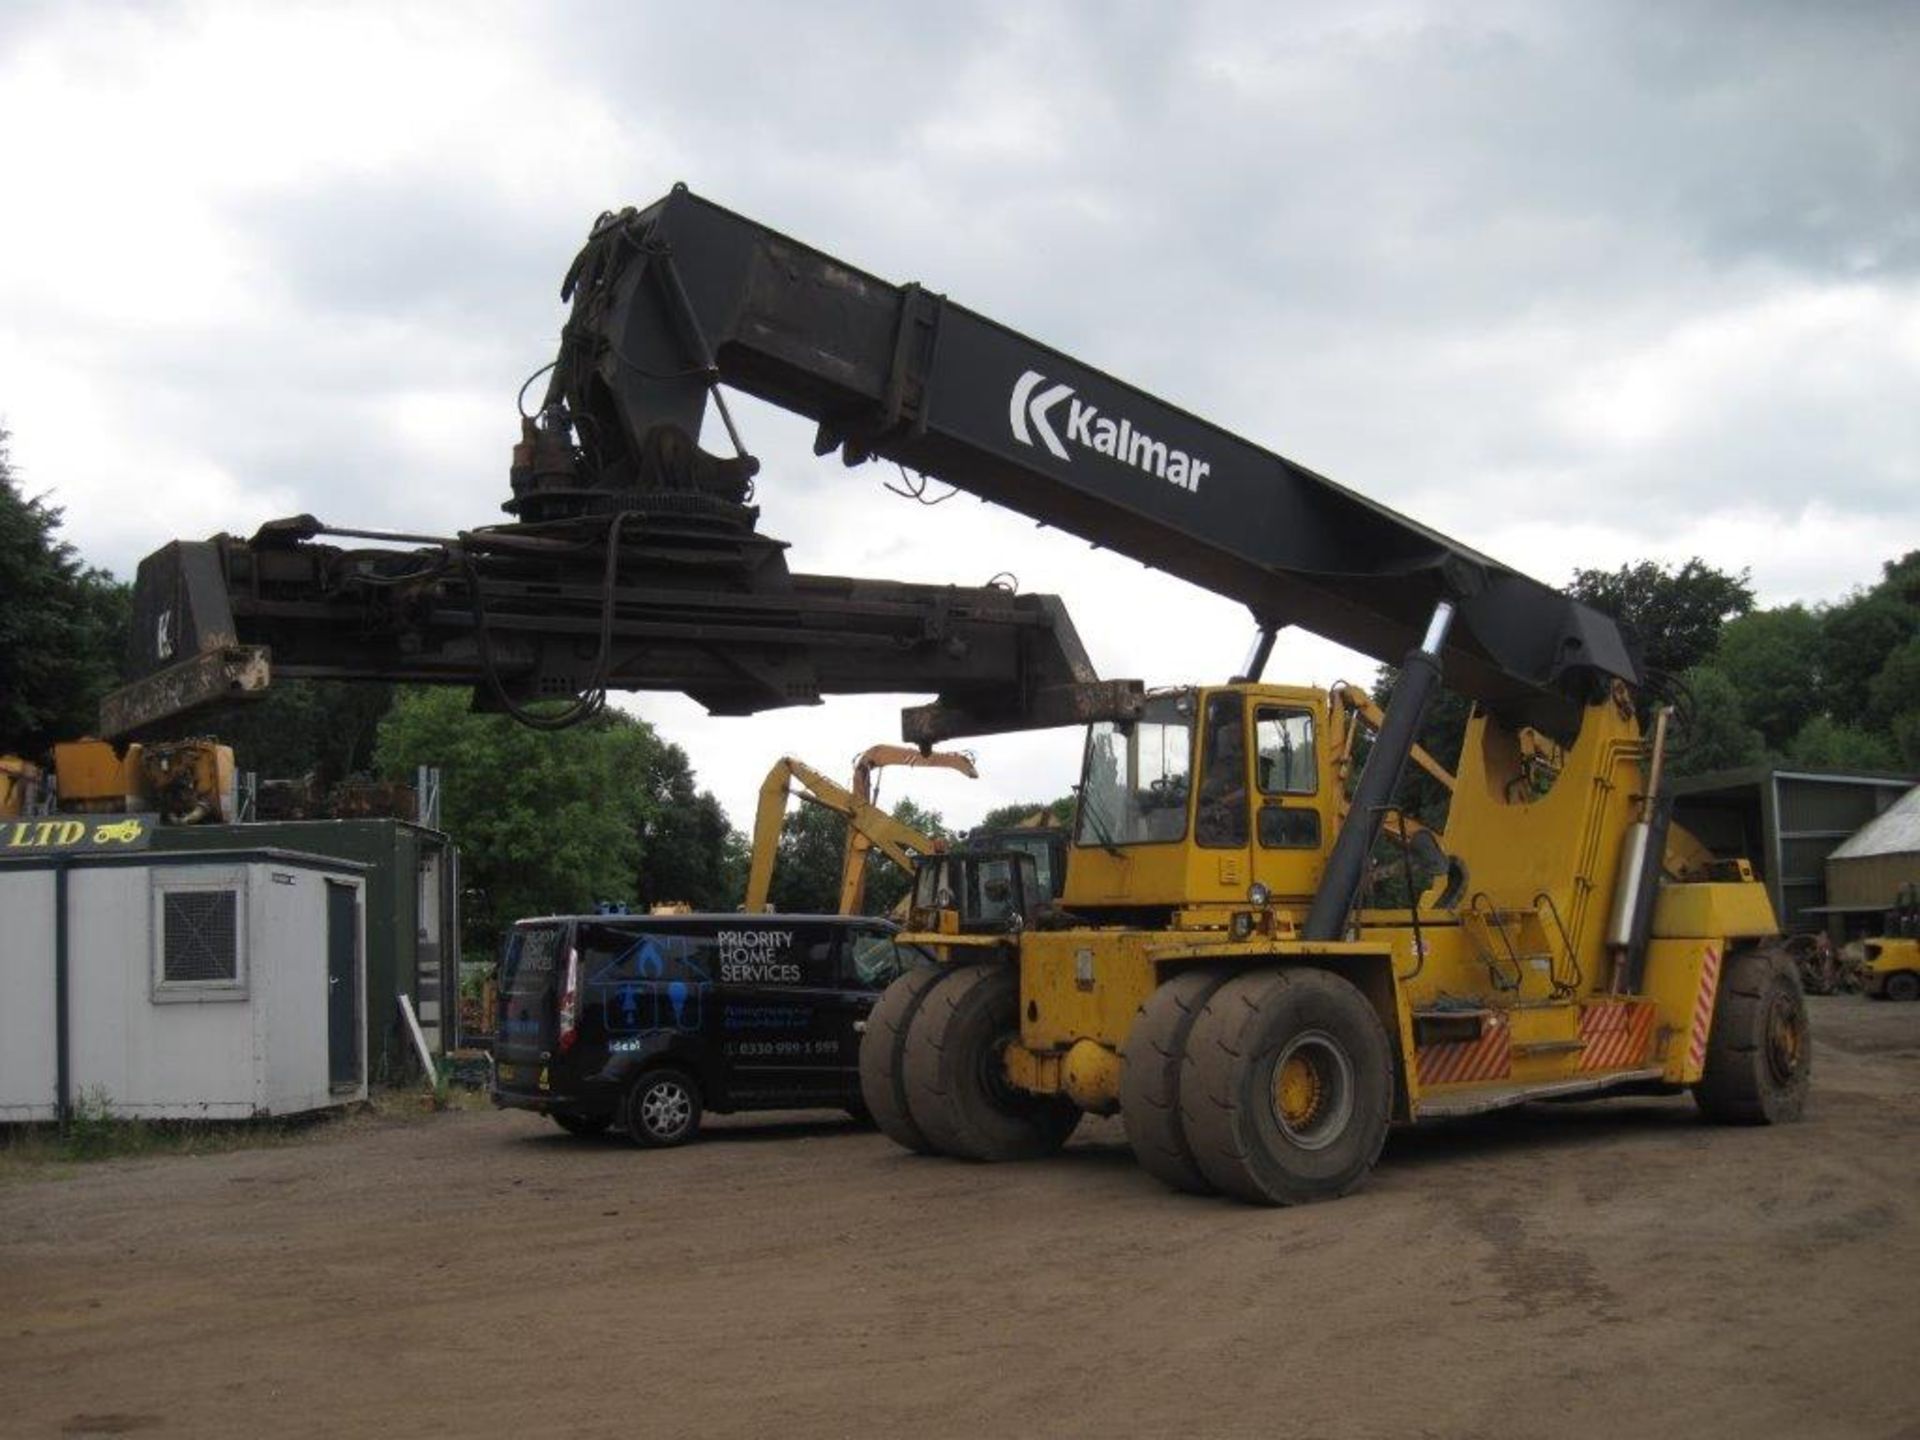 Kalmar Container Reachstacker 1994, Model is DC4161RS4, lifts 41 tonnes, runs well - Image 2 of 3